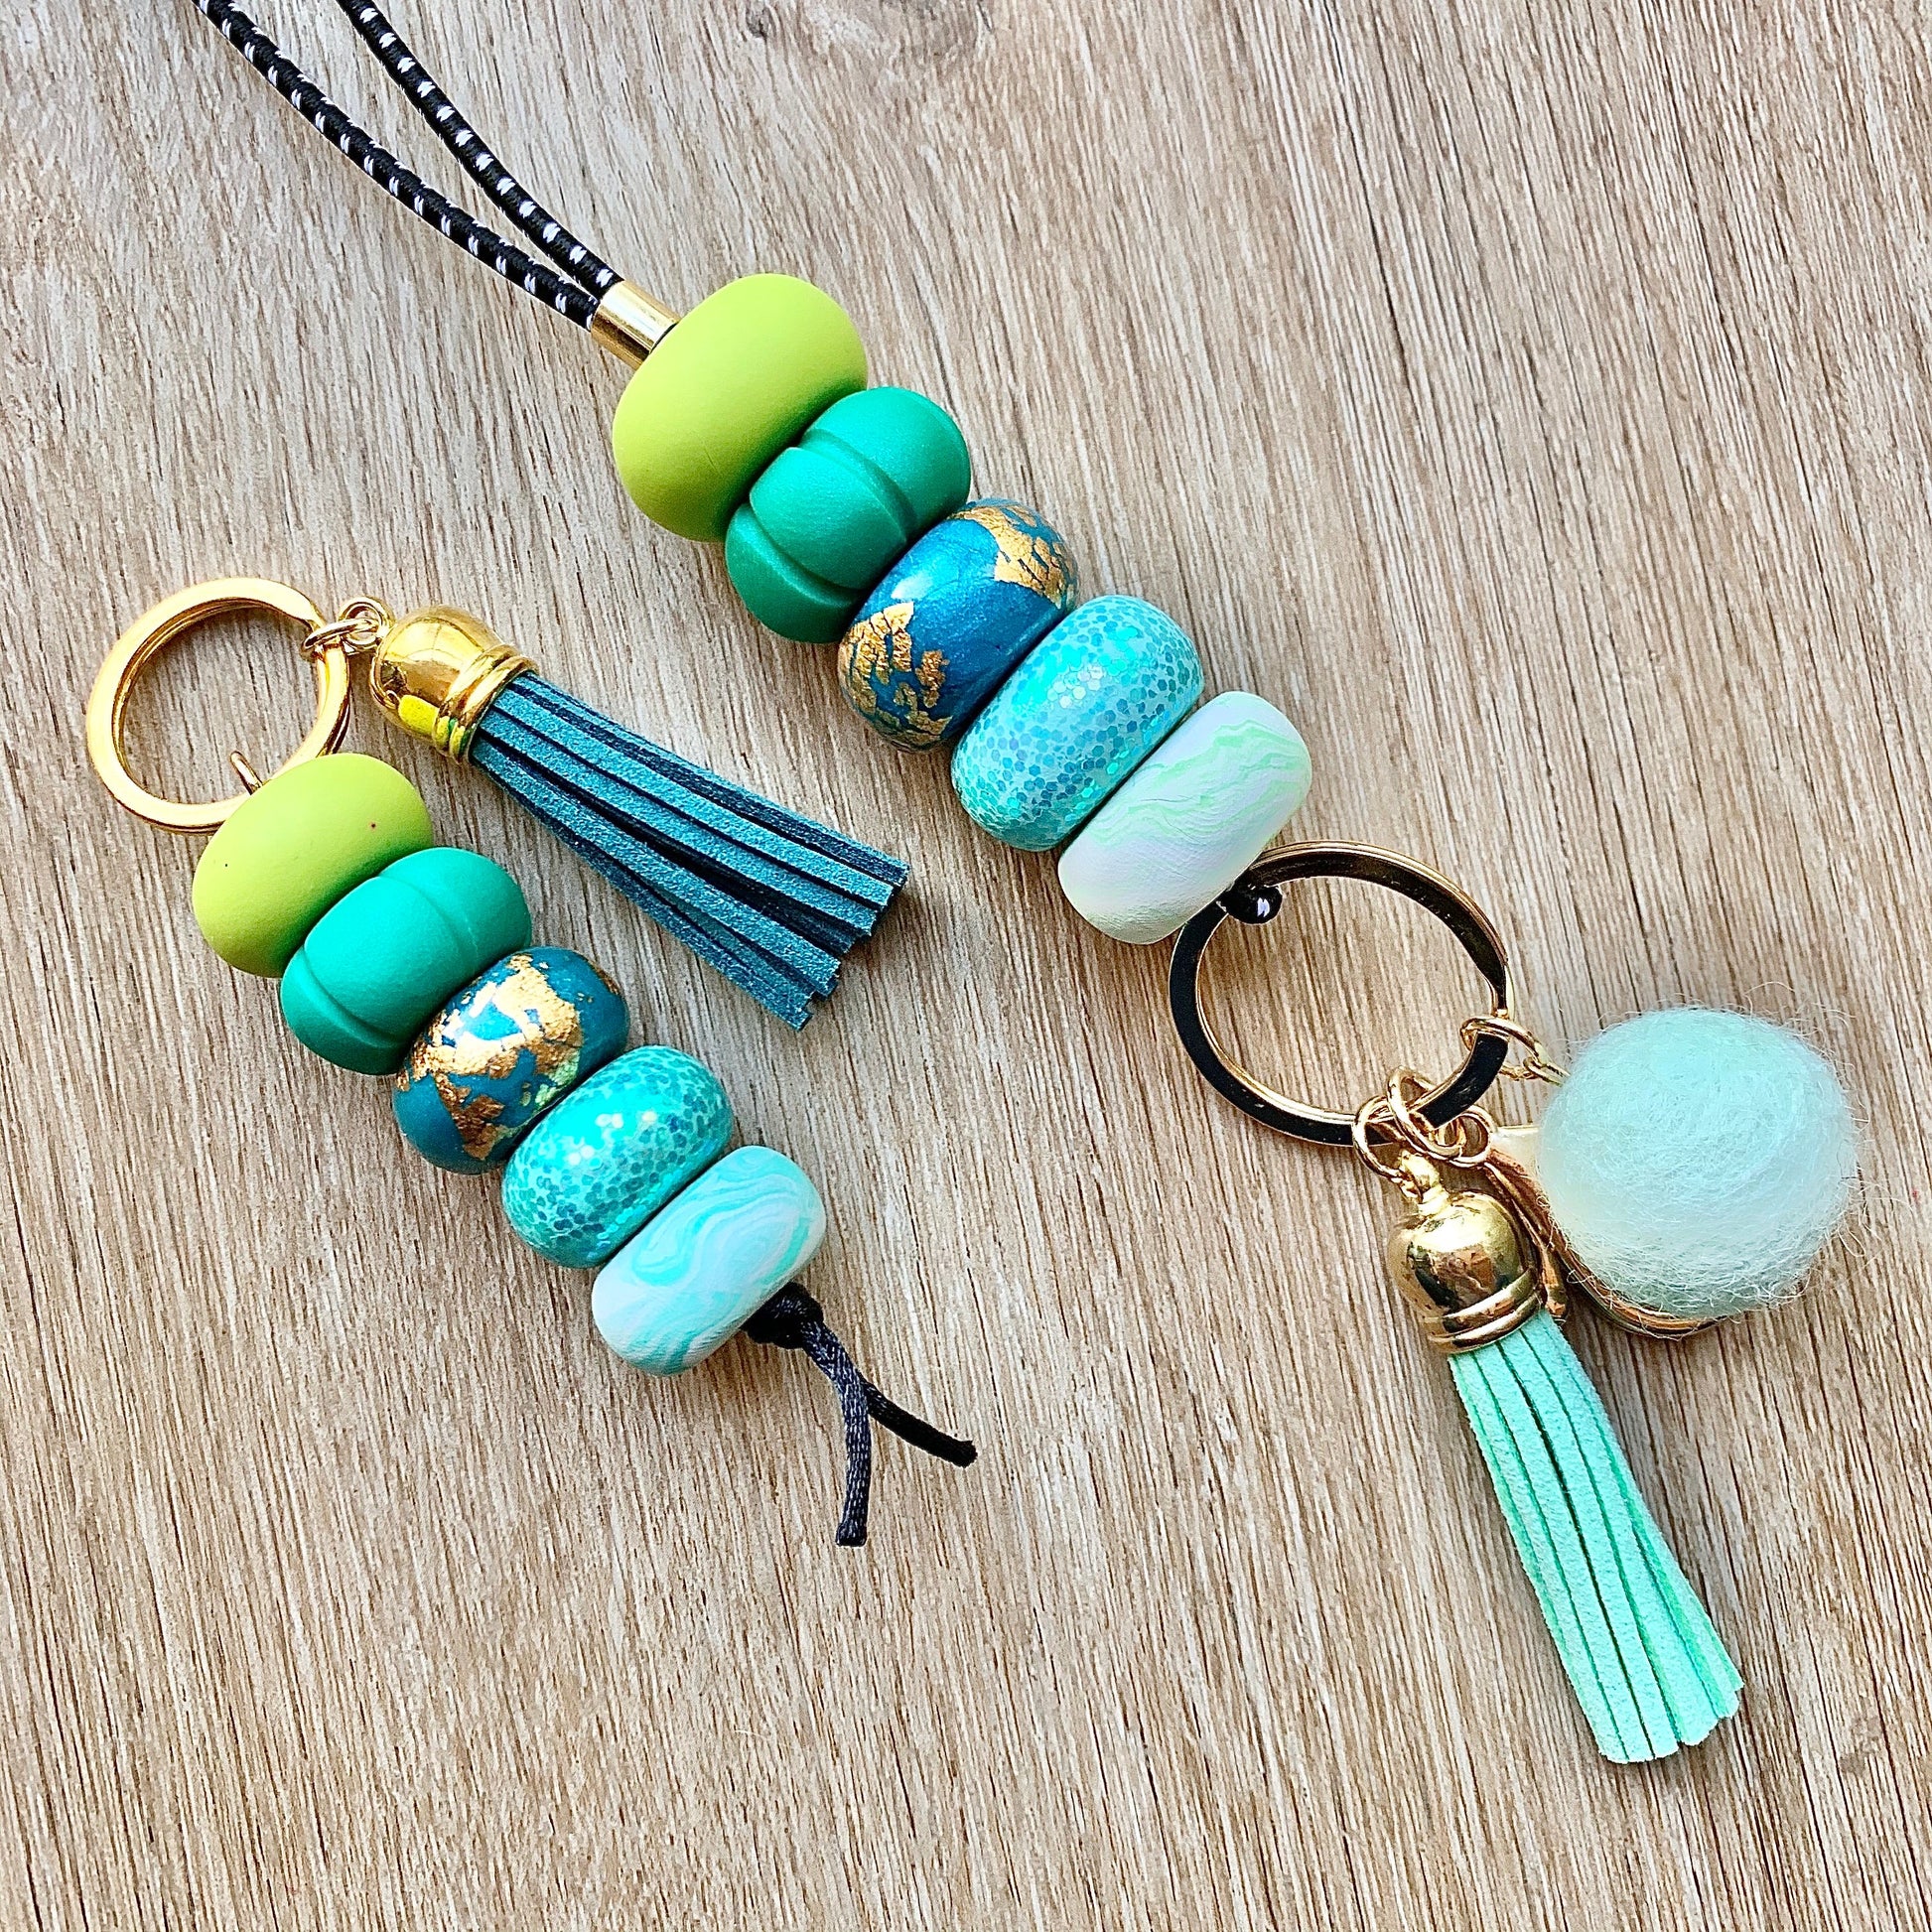 matching keychain and lanyard set in the blue green teal mint turquoise colour scheme